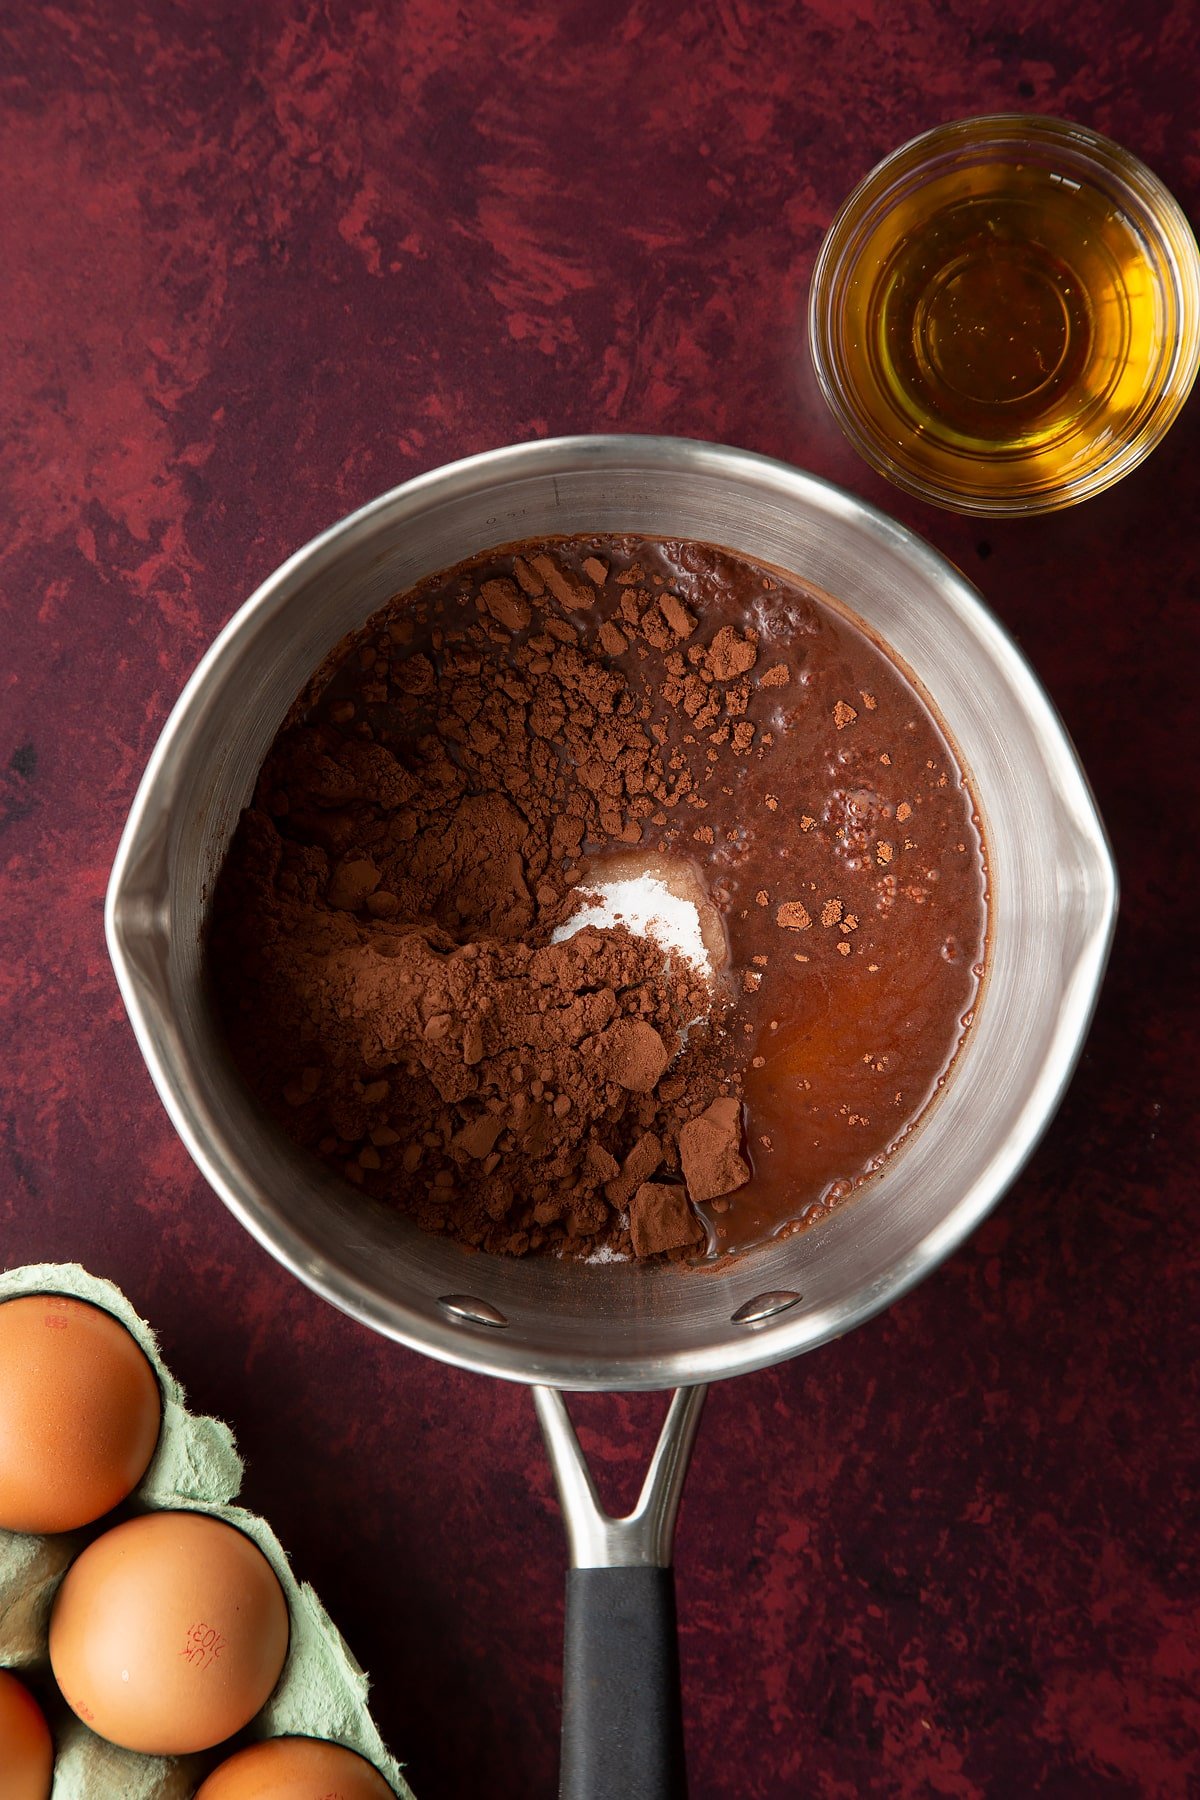 Sugar, cocoa powder, water and golden syrup in a small saucepan.